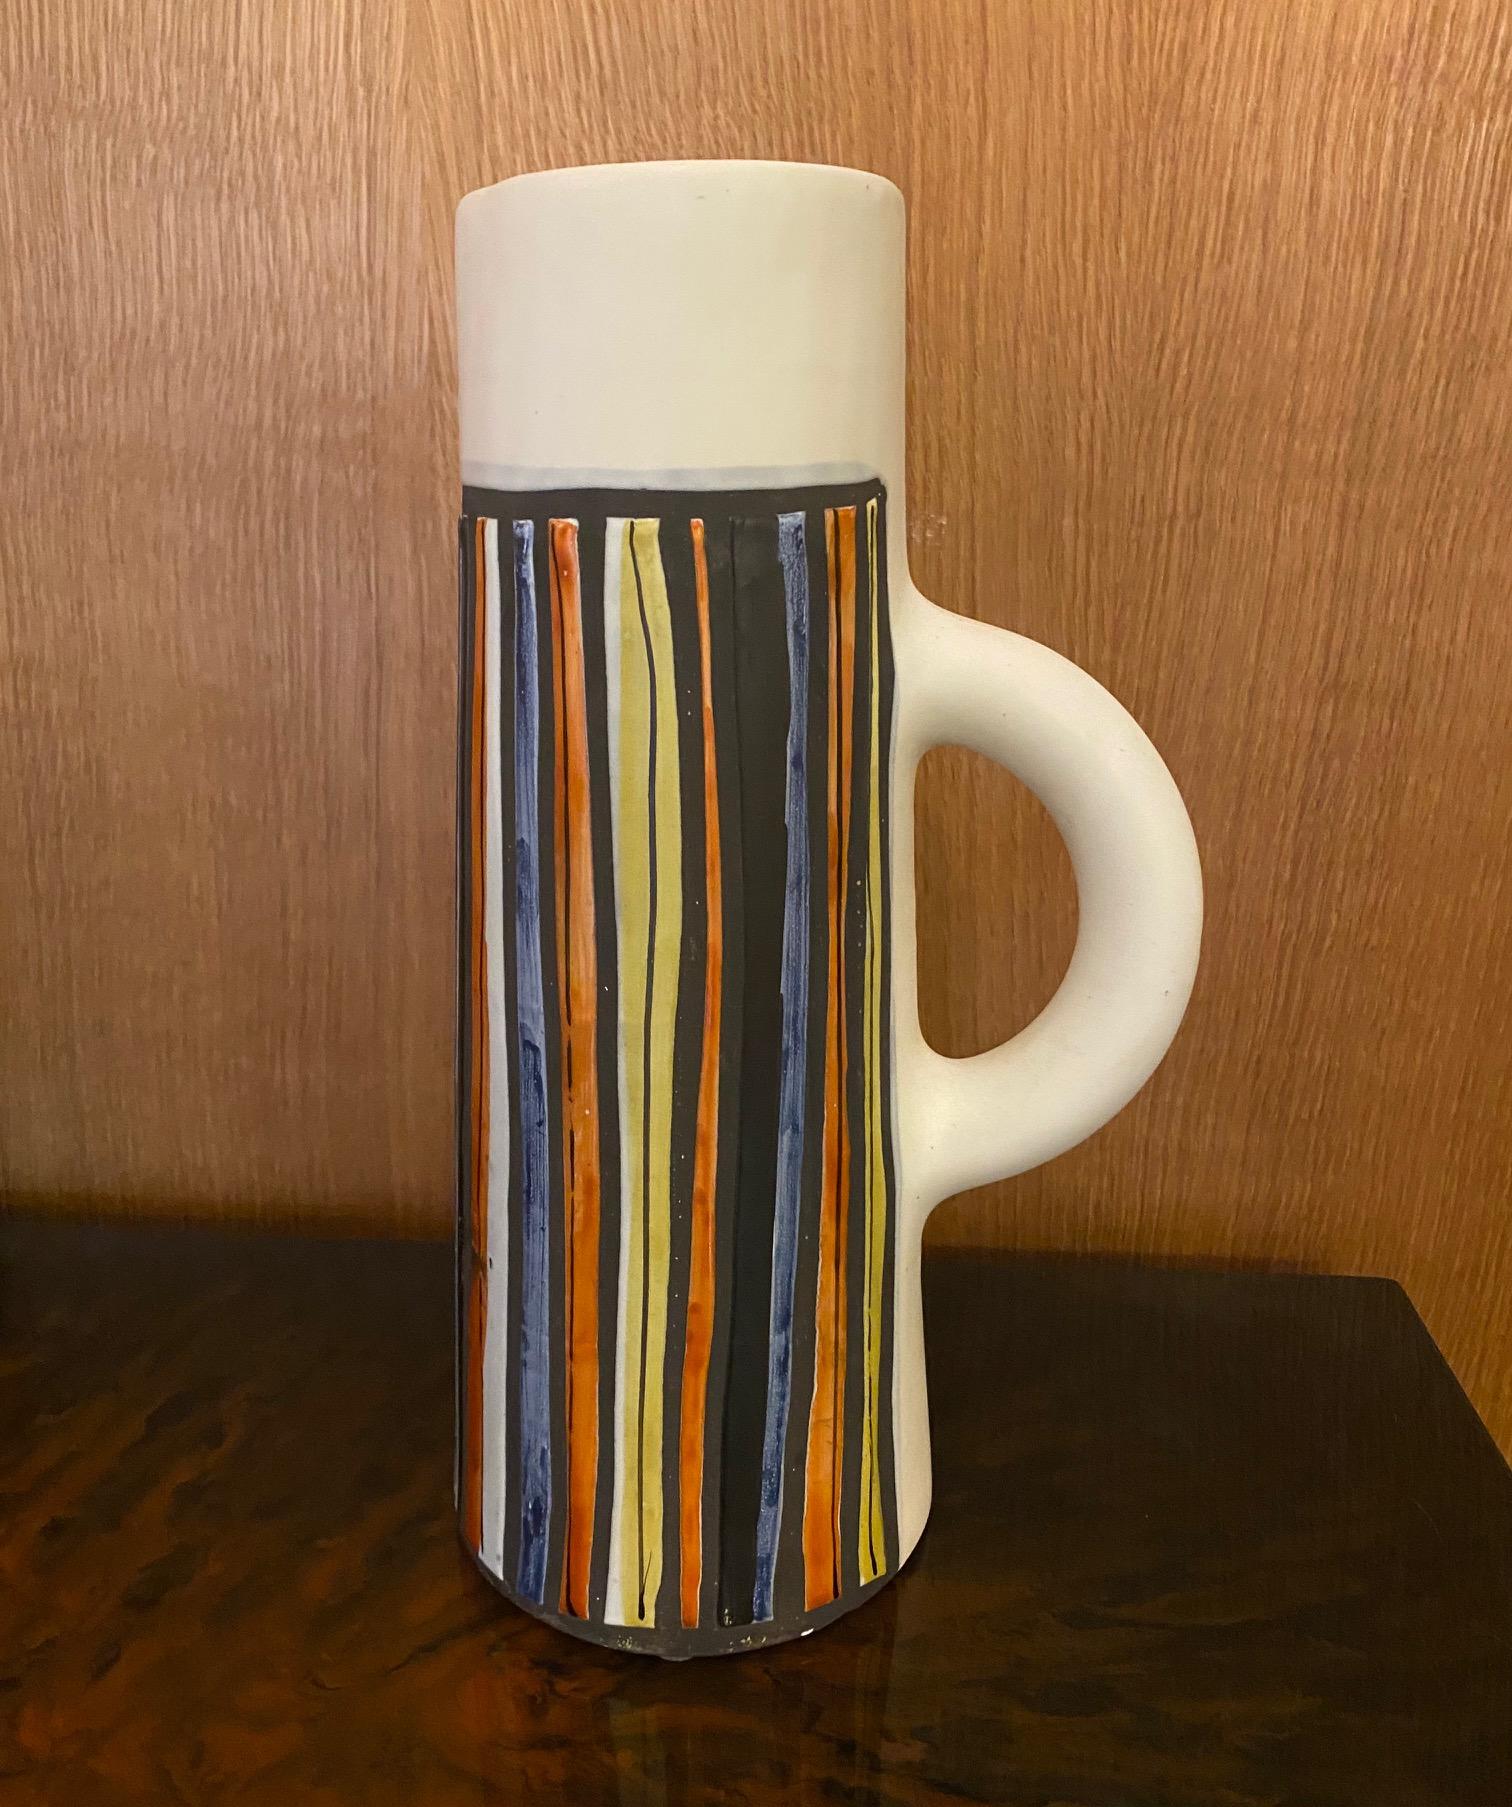 French Ceramic Pitcher by Roger Capron, France, Vallauris, 1950s For Sale